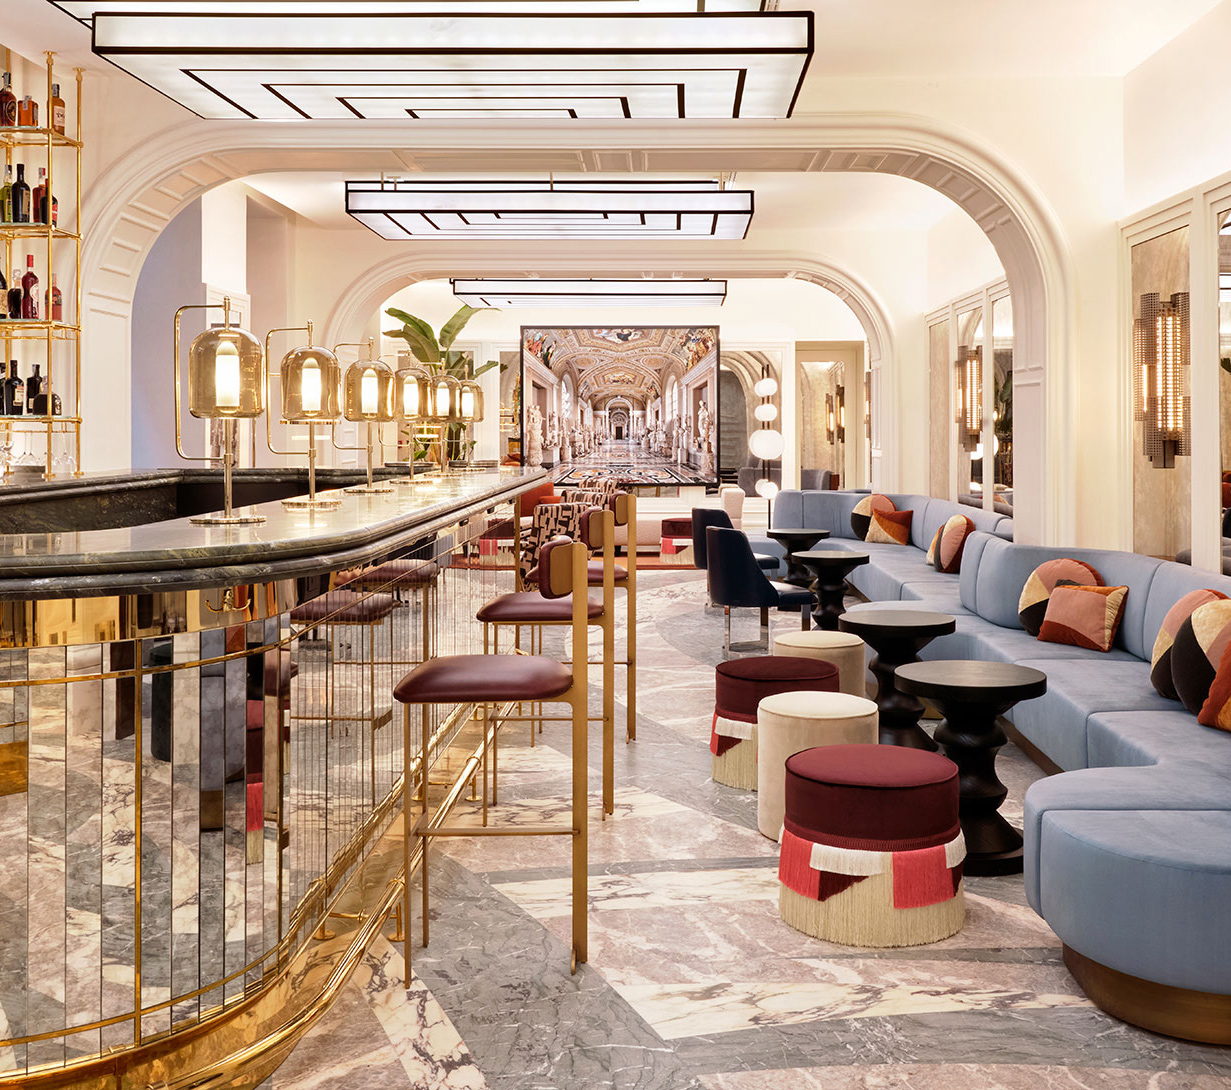 An elegant bar with a marble floor, plush seating in blue and crimson, and gold accents throughout. a well-lit ceiling and extensive shelving with bottles complete the luxurious setting.